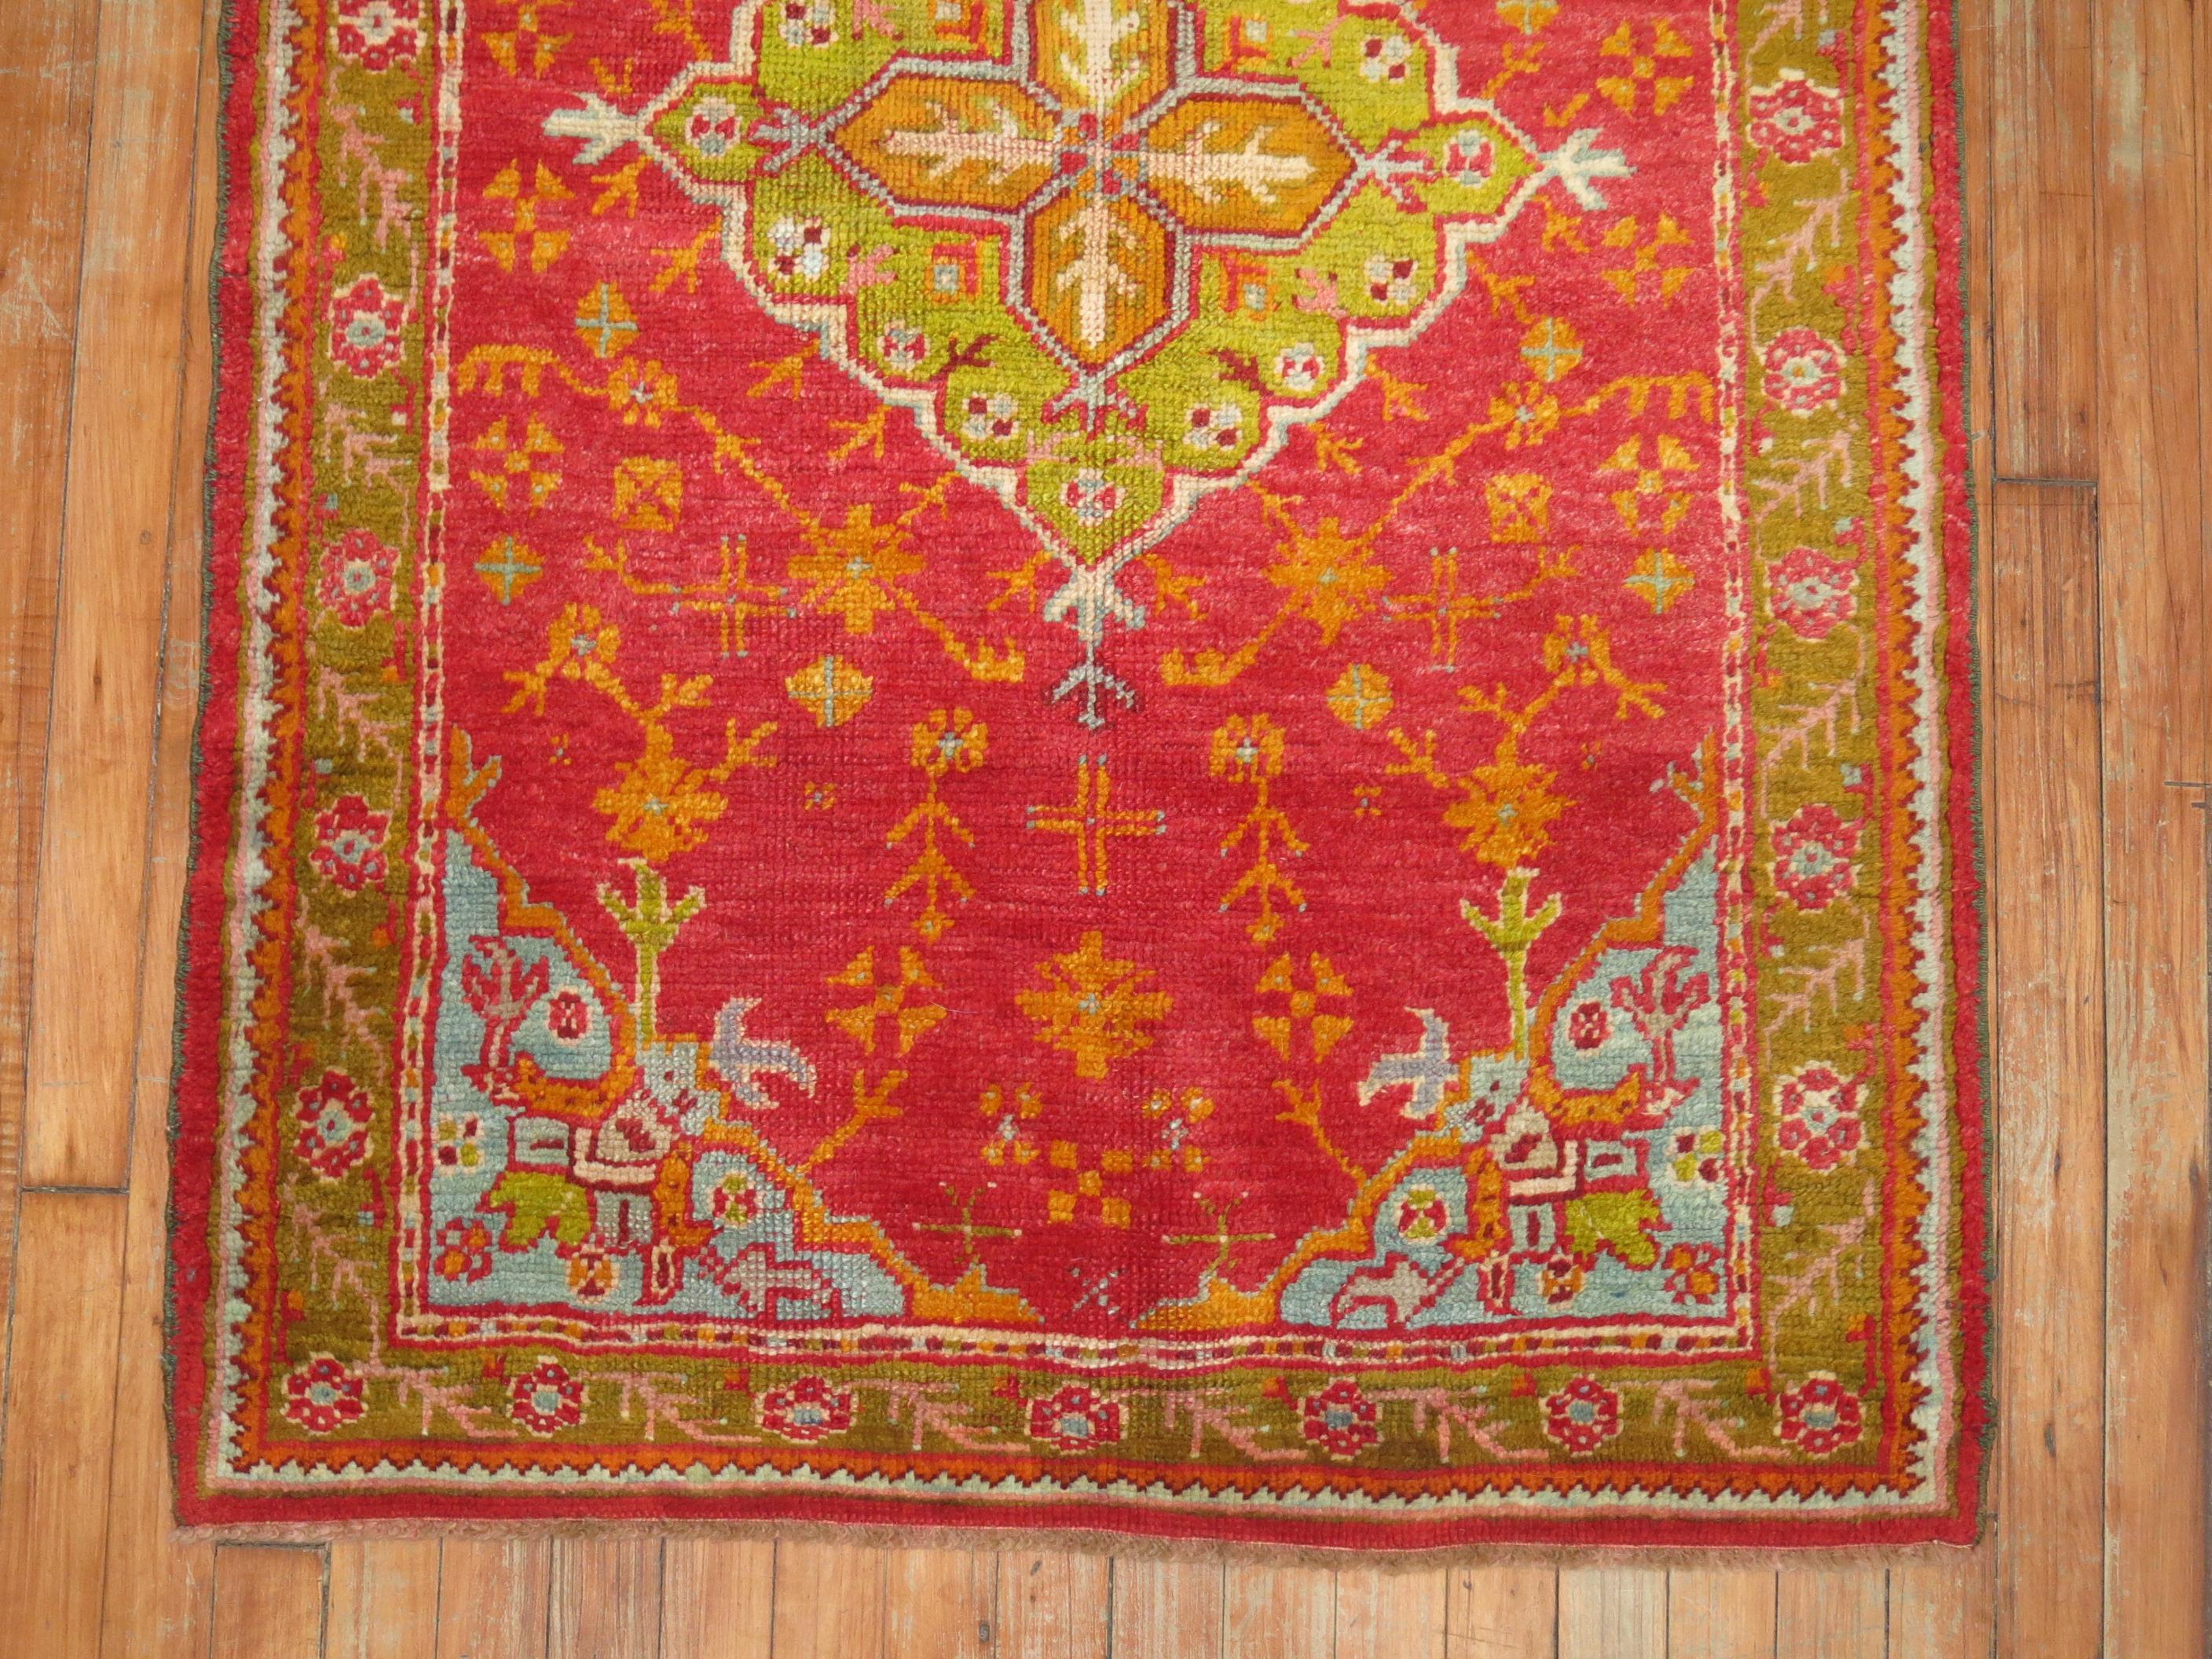 Hand-Woven Antique Turkish Oushak Rug in Bright Colors